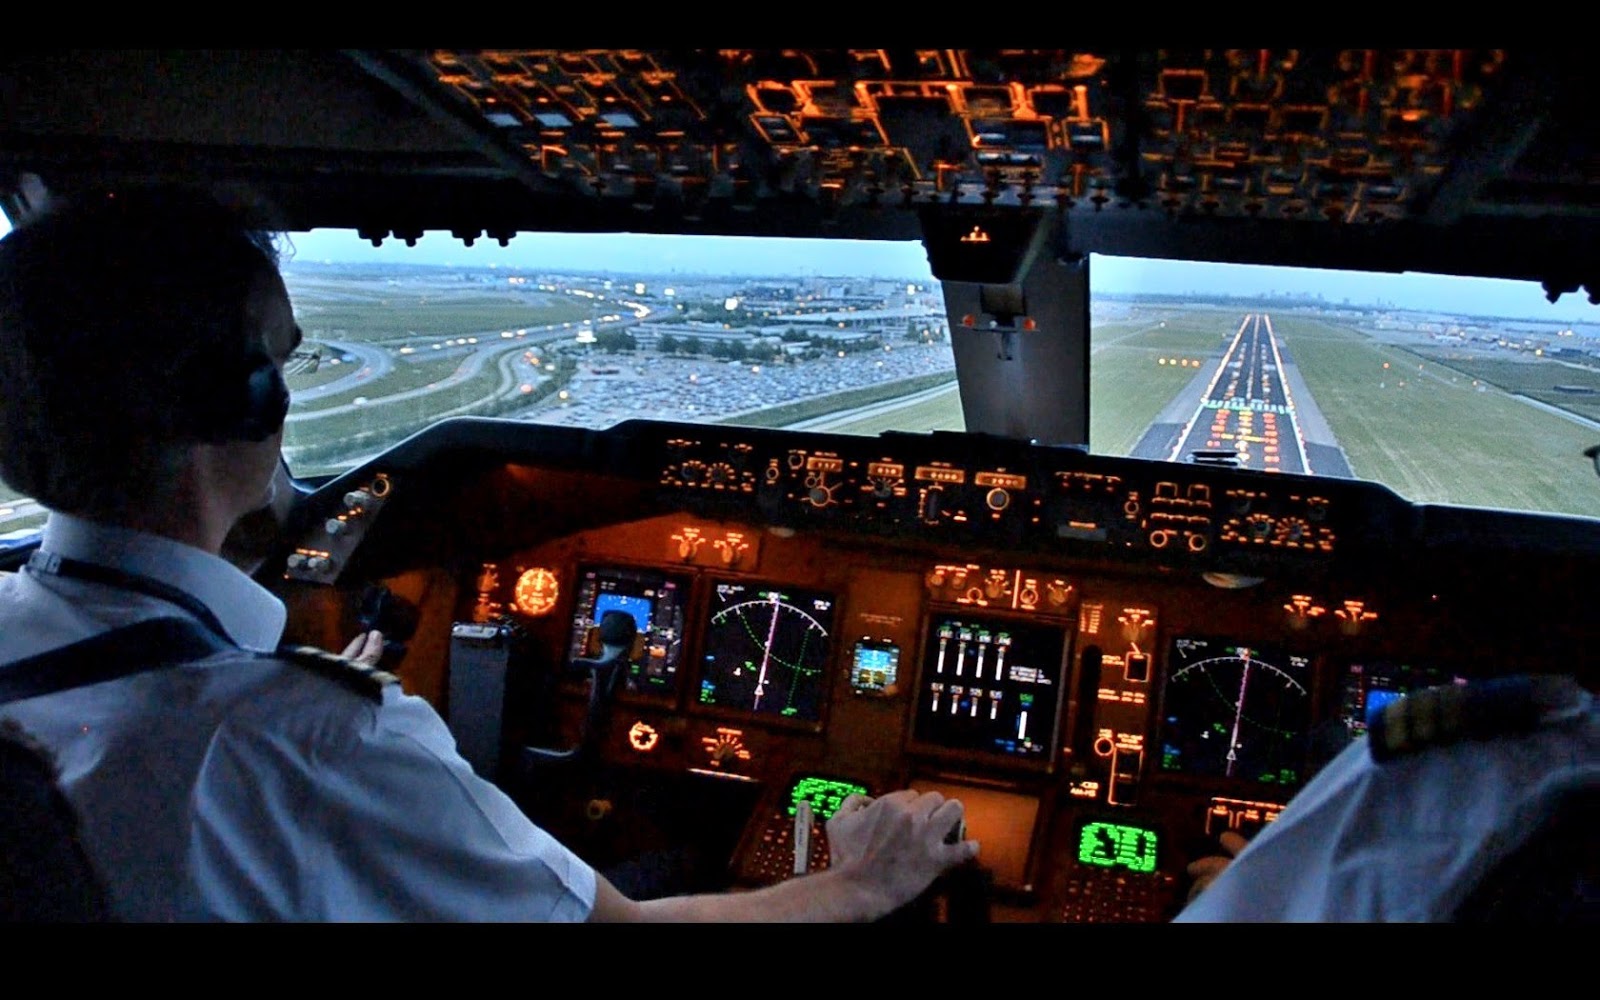 Take the Challenge of flying Instrument Landing System Approaches!